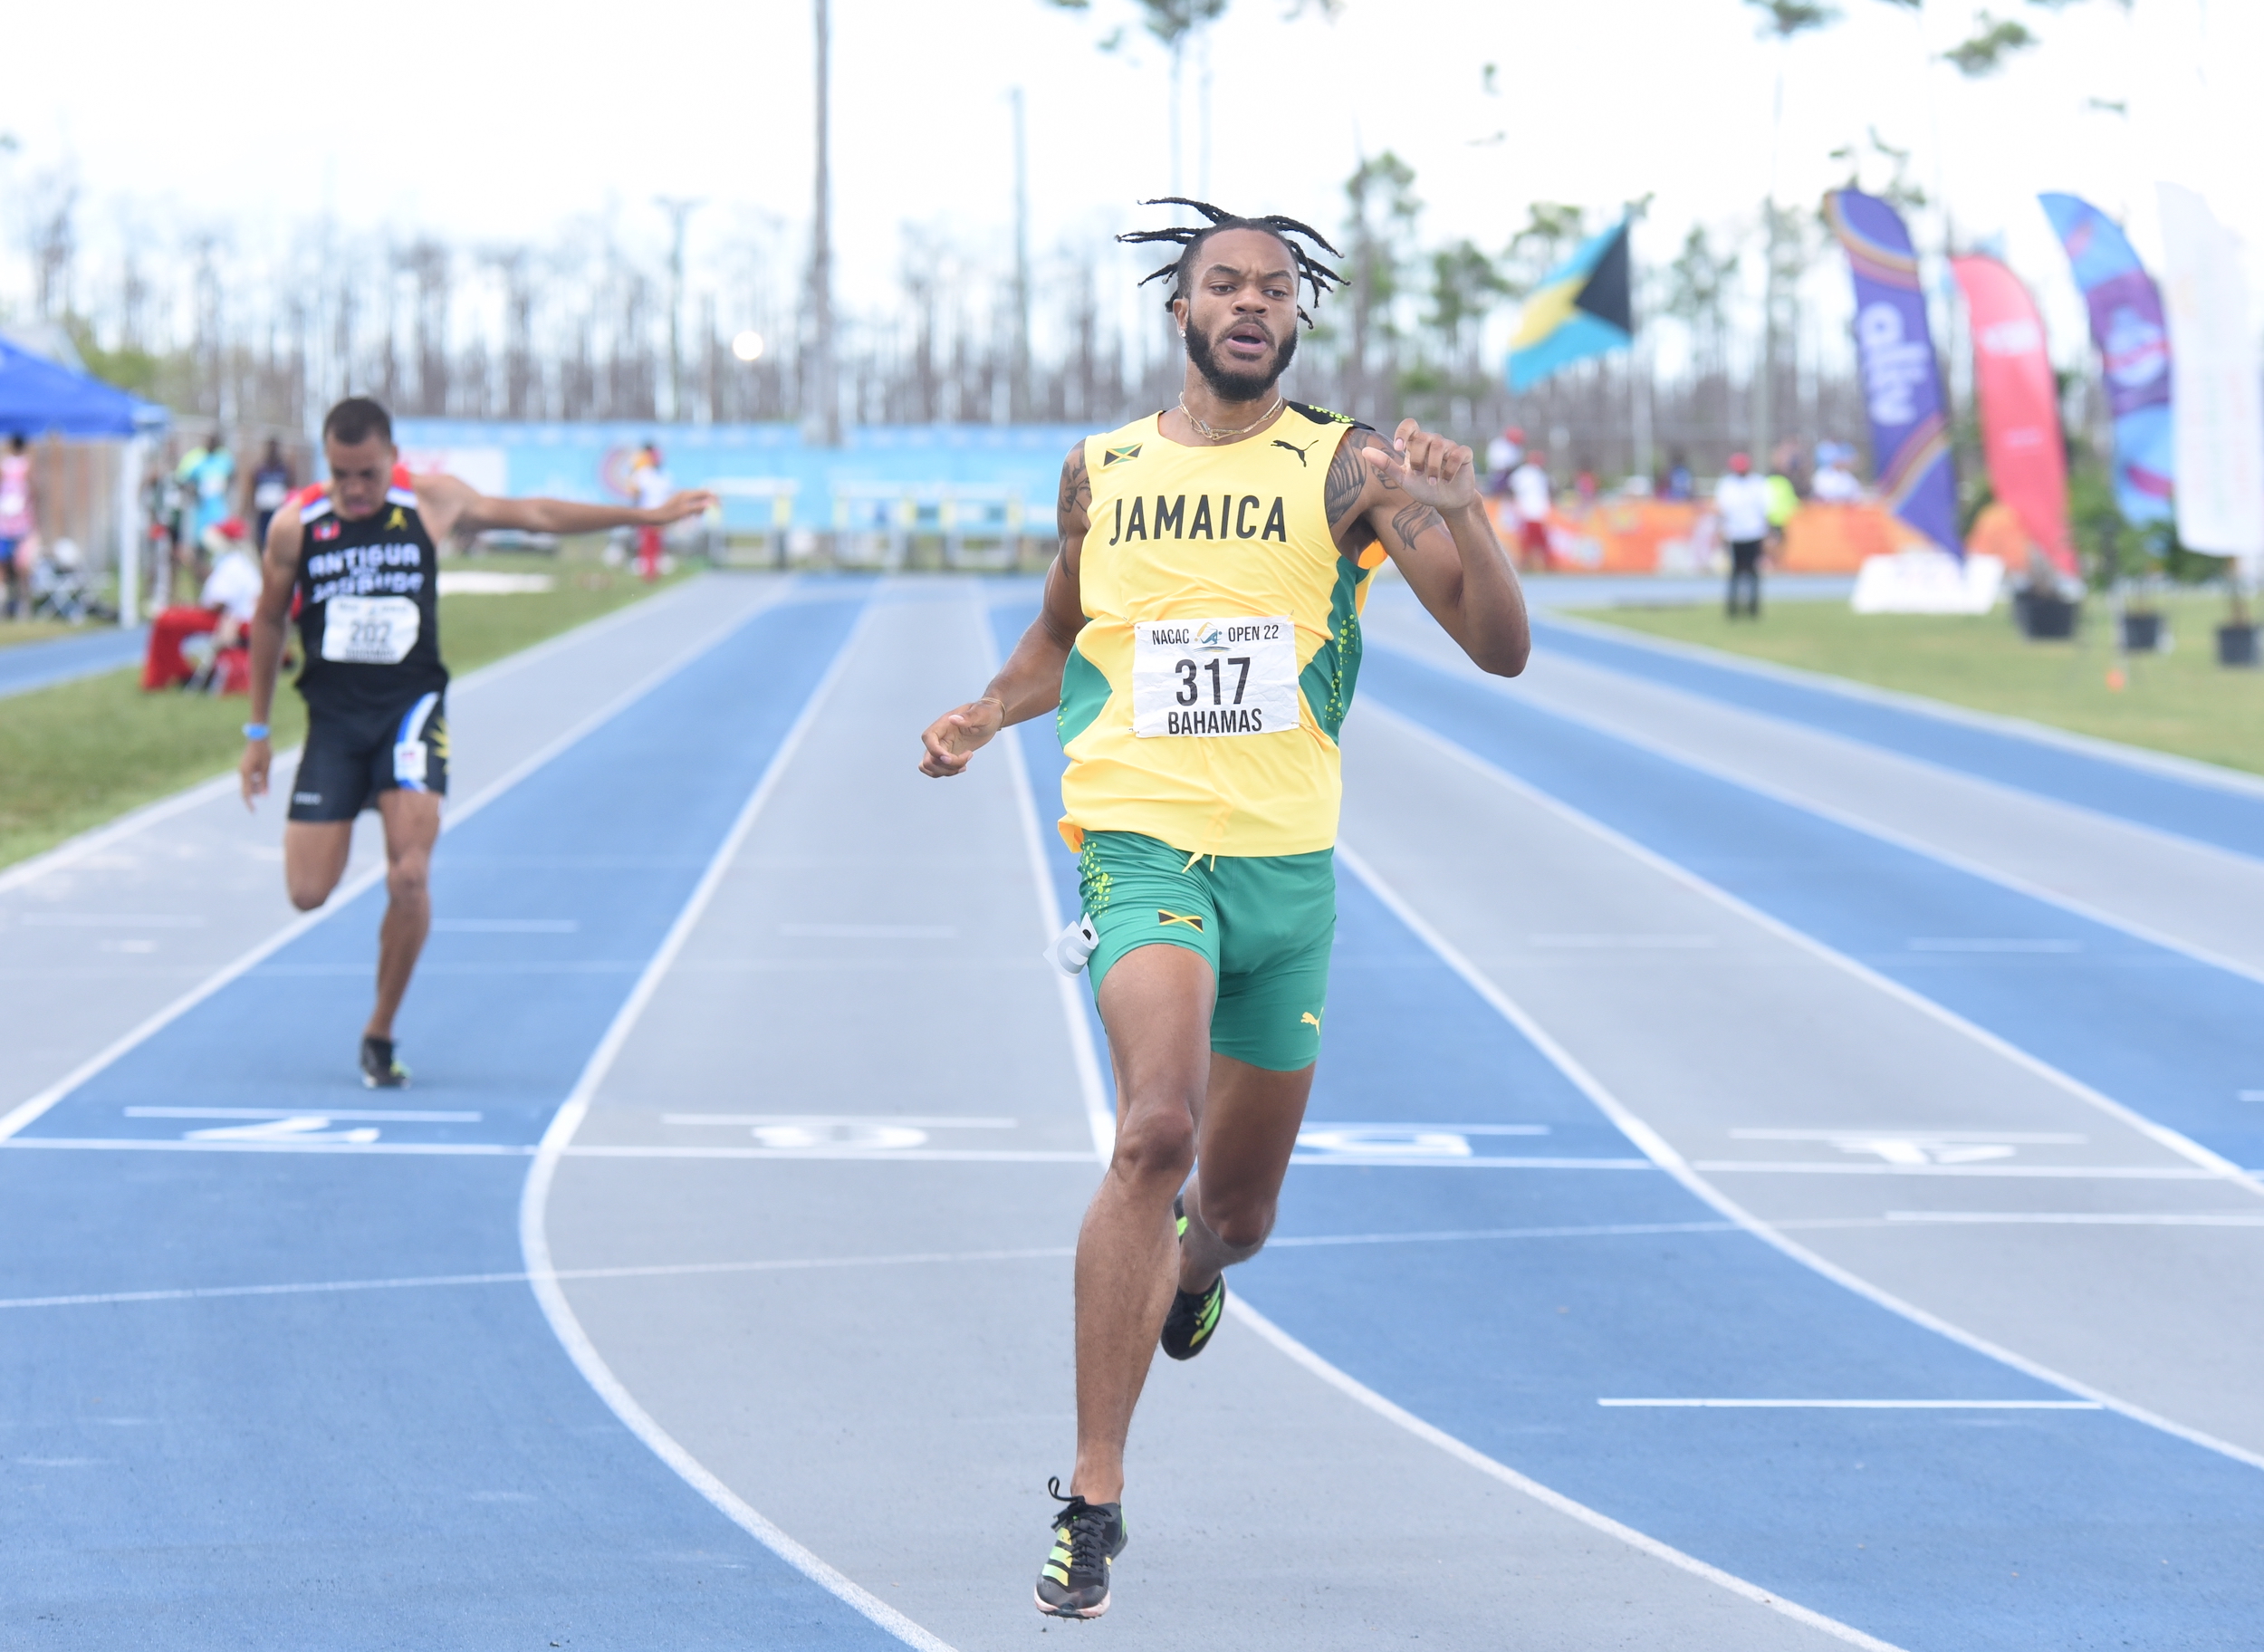 Andrew Hudson wins the men's 200m final at the NACAC Open Championships in Freeport, Grand Bahamas